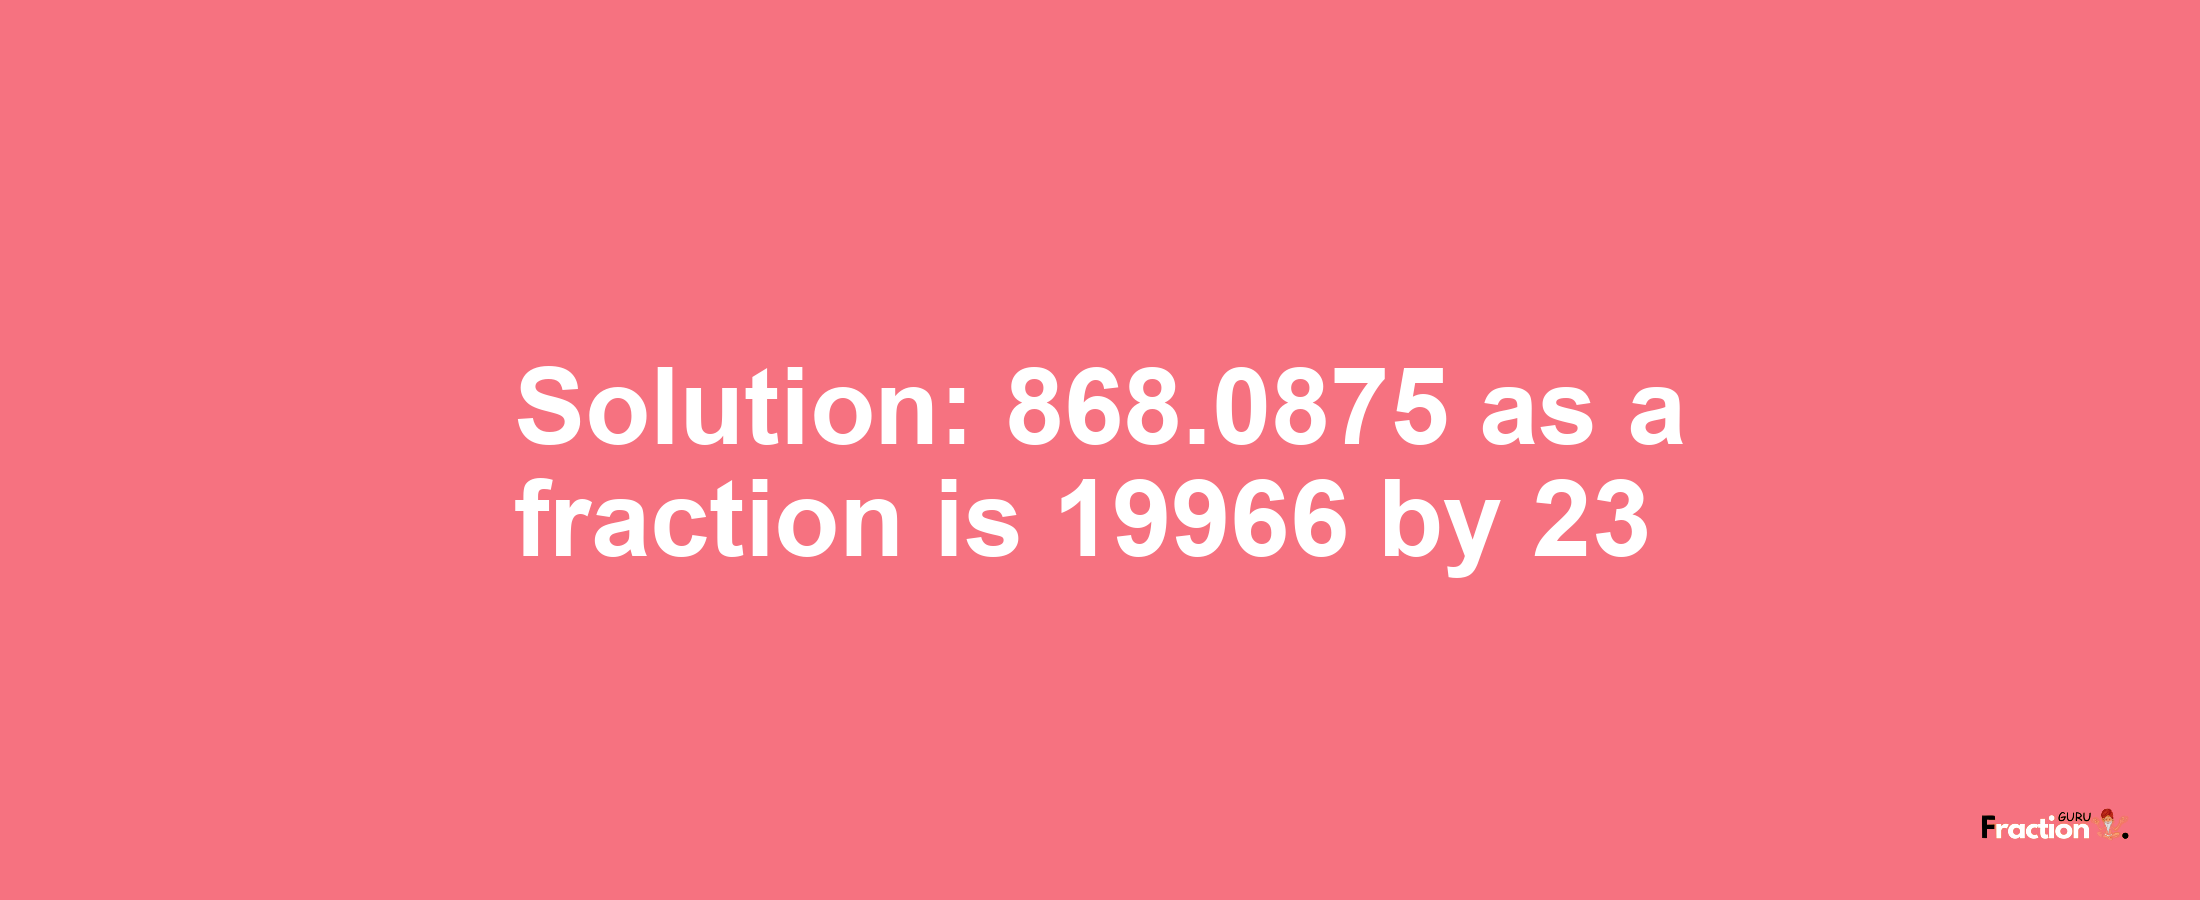 Solution:868.0875 as a fraction is 19966/23